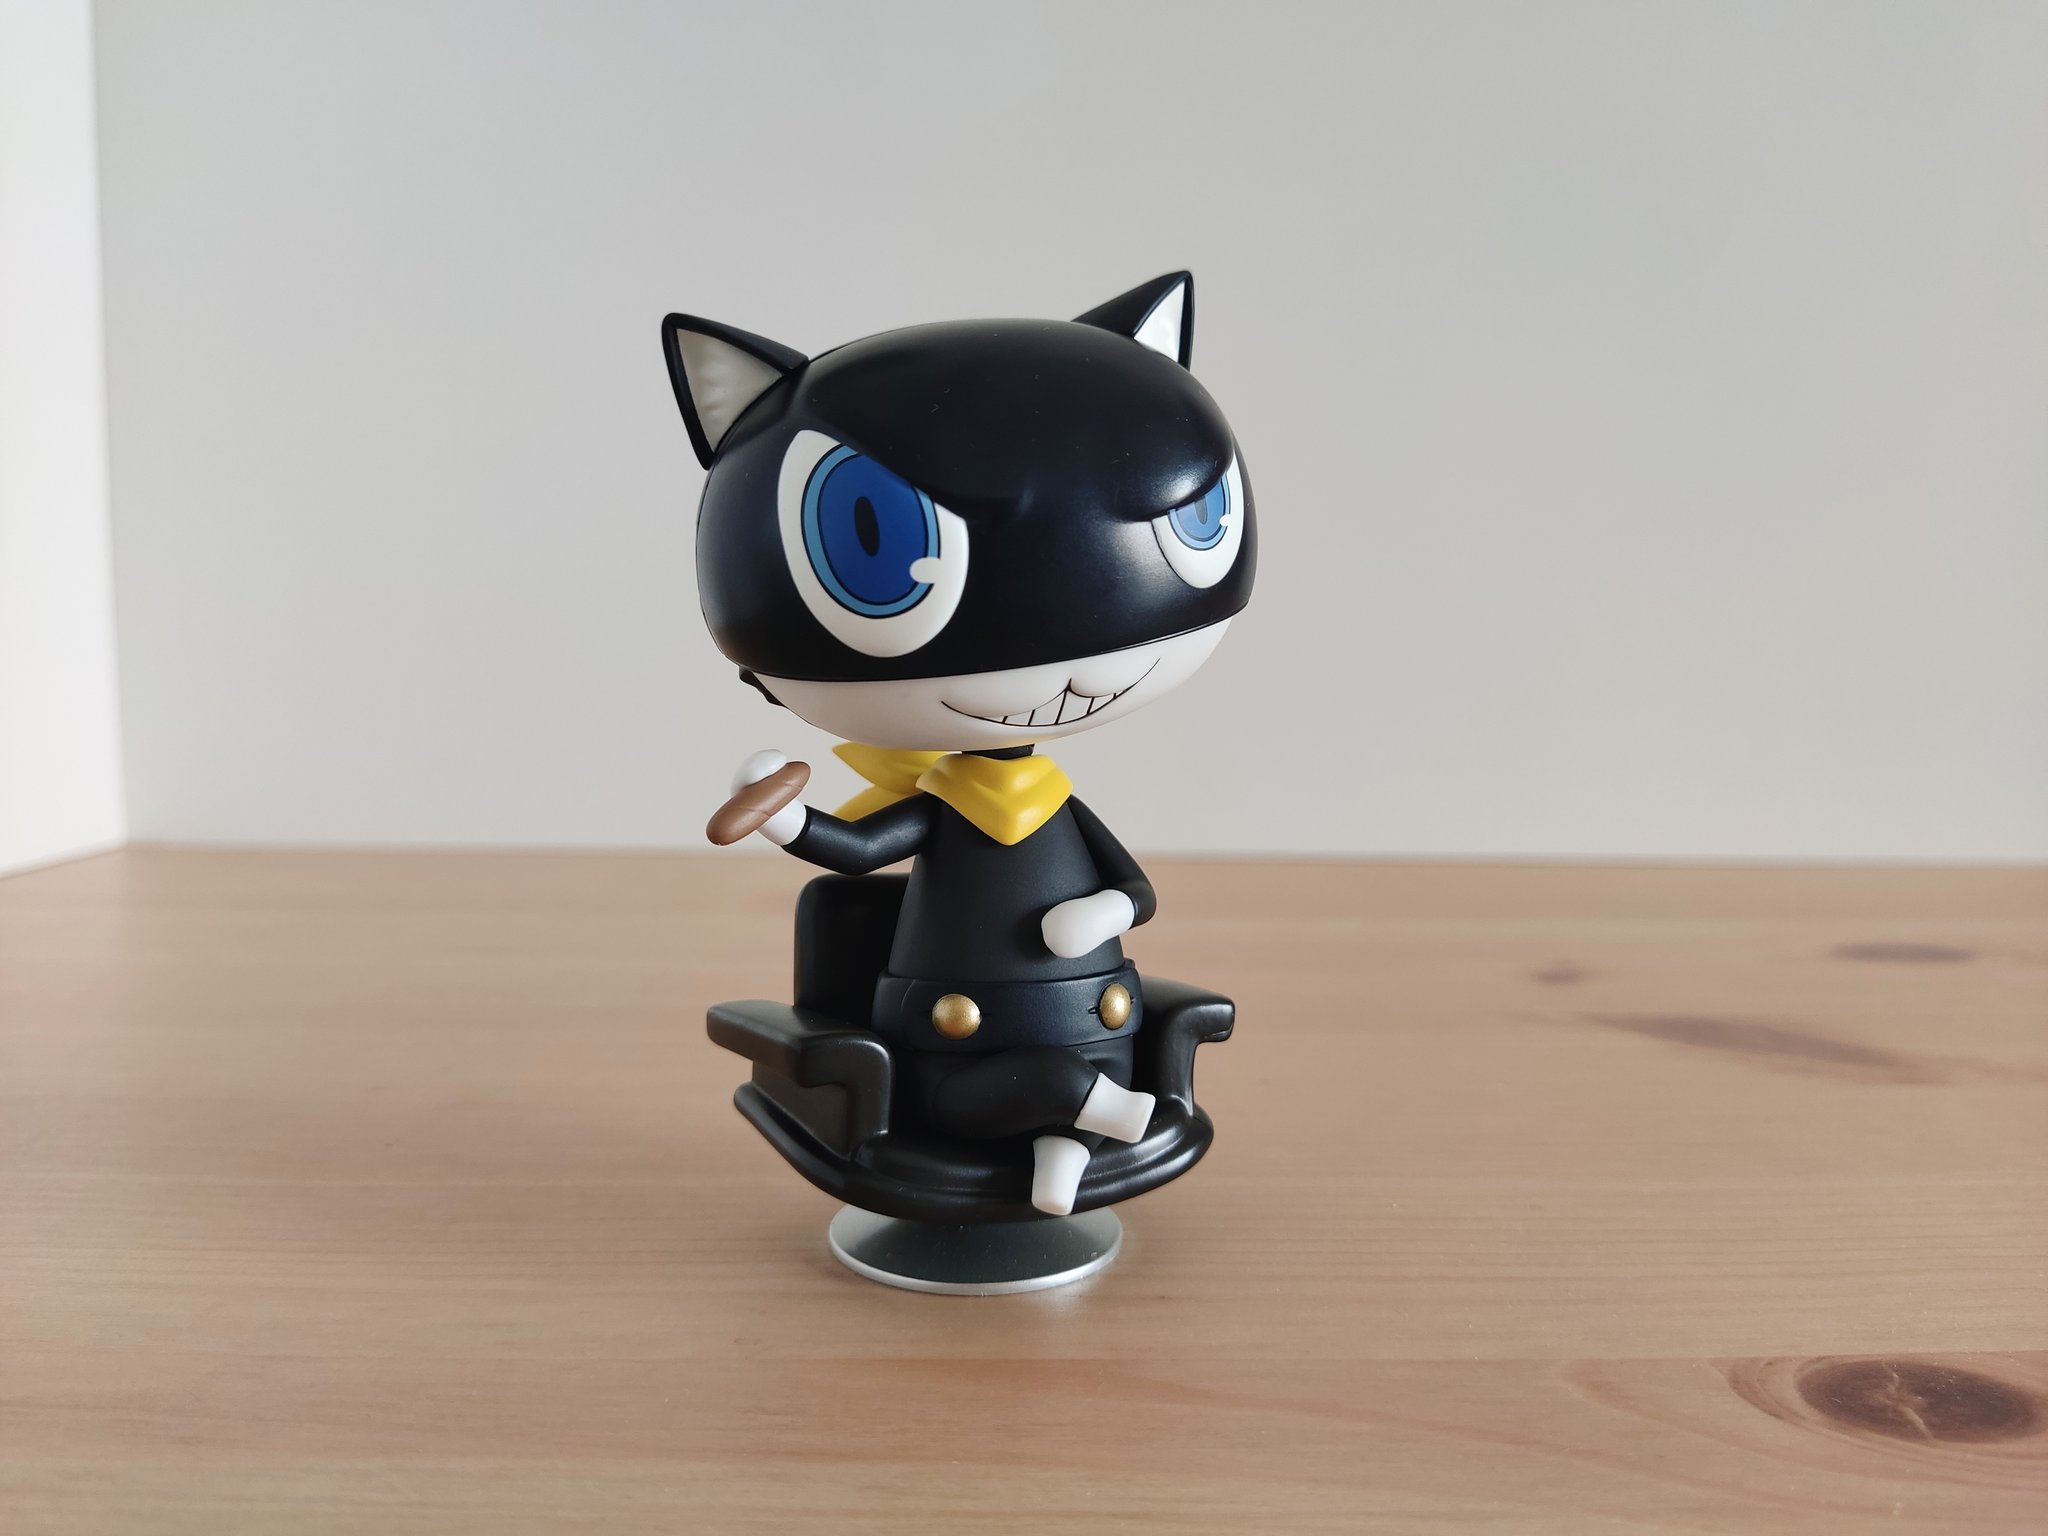 Løb klimaks matchmaker THE ART OF VIDEO GAMES on Twitter: "Nendoroid Morgana (Persona 5) provided  by ZenPlus Thank you very much @zenplus_en for this purrfect gift!  https://t.co/ZPnN356FrL" / Twitter